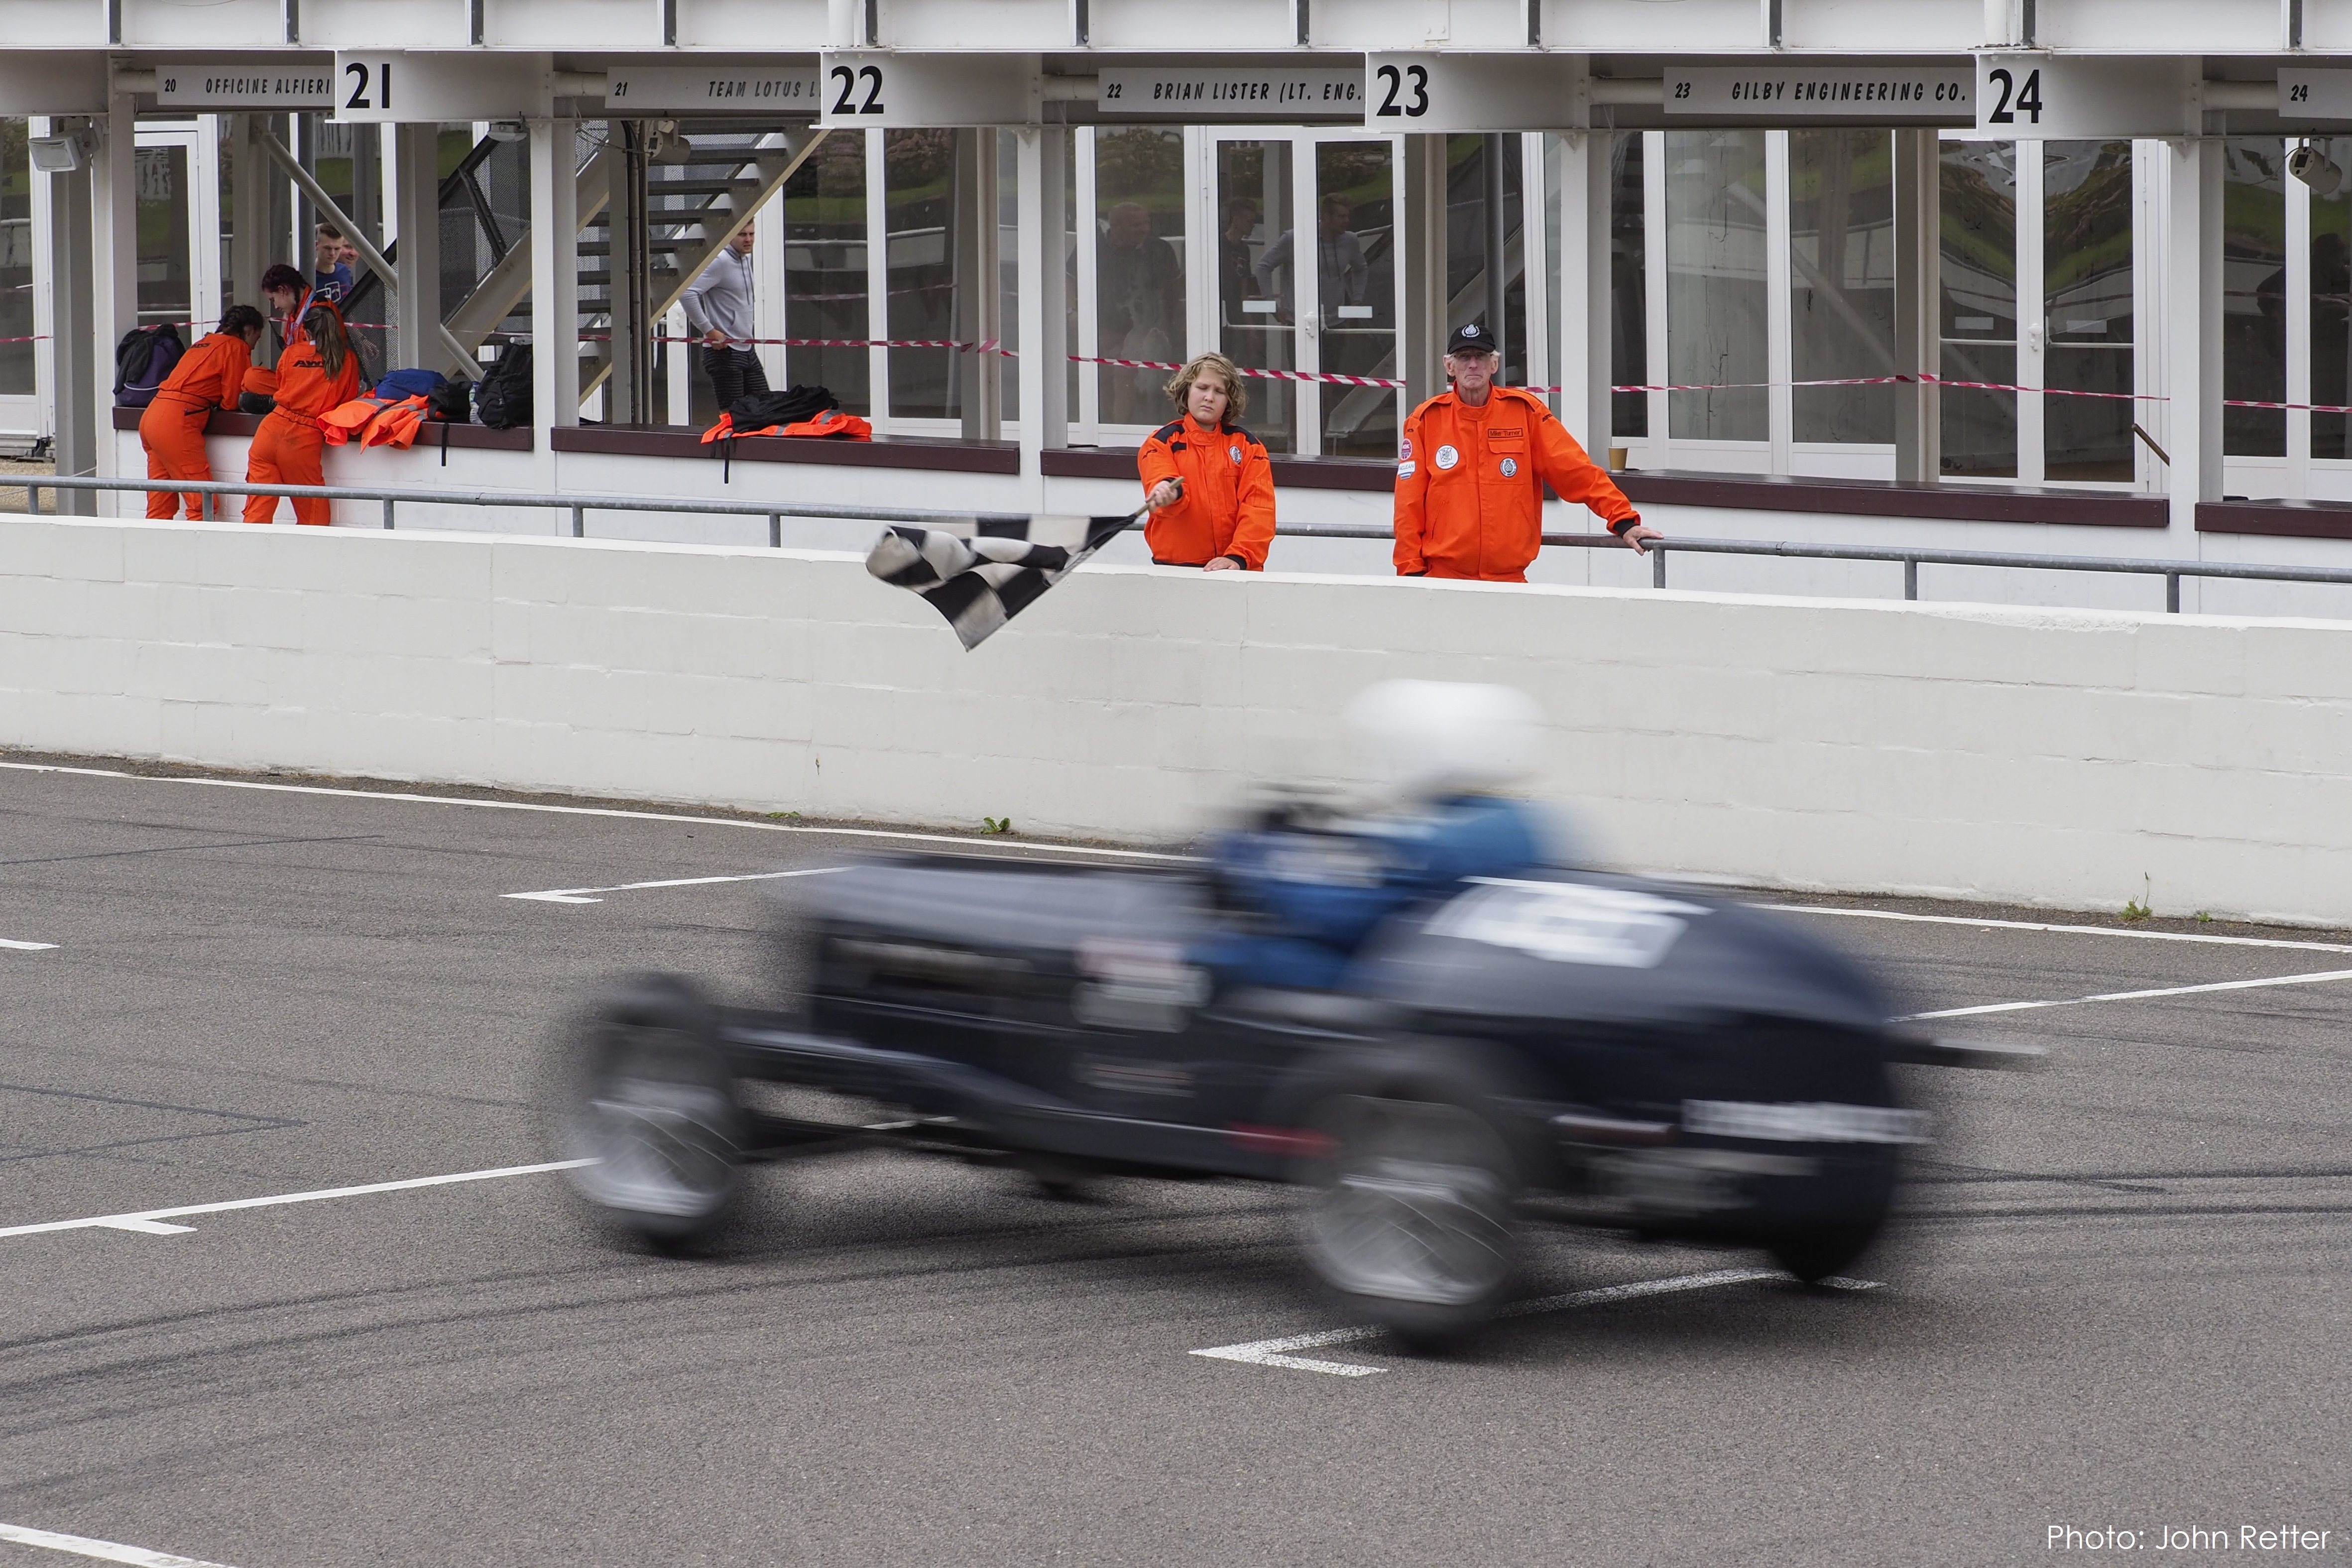 The VSCC Descends Upon Goodwood: The Sprint at Goodwood & Summer Rally cover